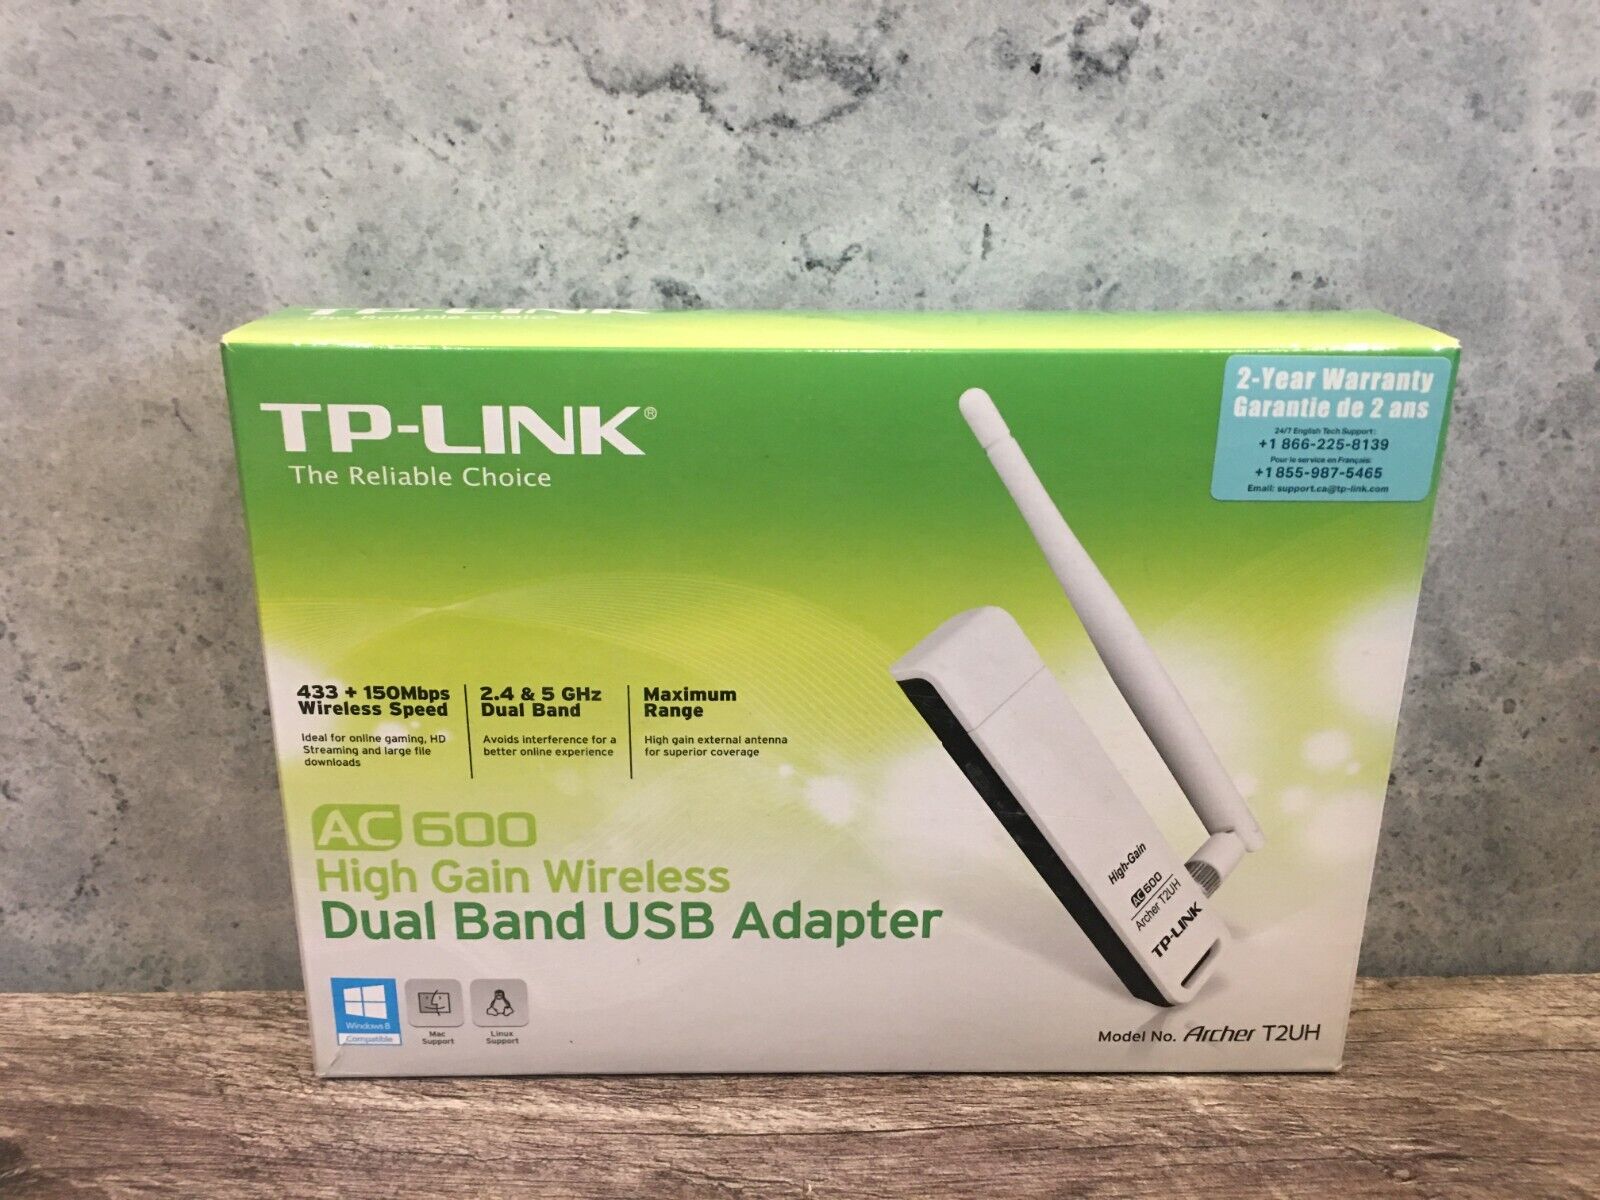 TP-Link AC 600 High Gain Wireless Dual Band USB Adapter Archer T2UH *Tested Work